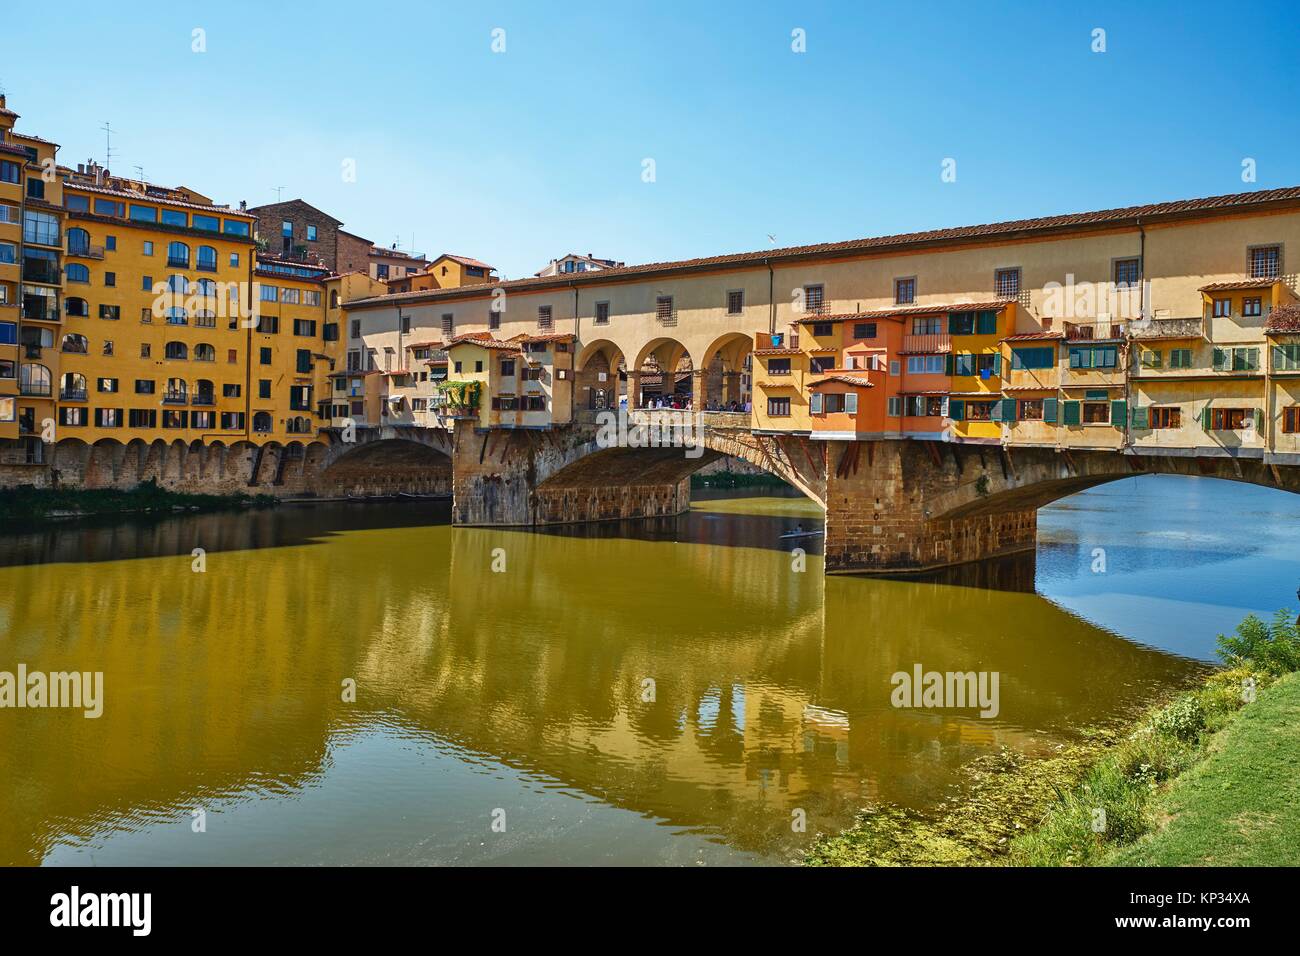 The Ponte Vecchio (´Old Bridge´) is a medieval stone closed-spandrel segmental arch bridge over the Arno River, in Florence, Italy, noted for still Stock Photo